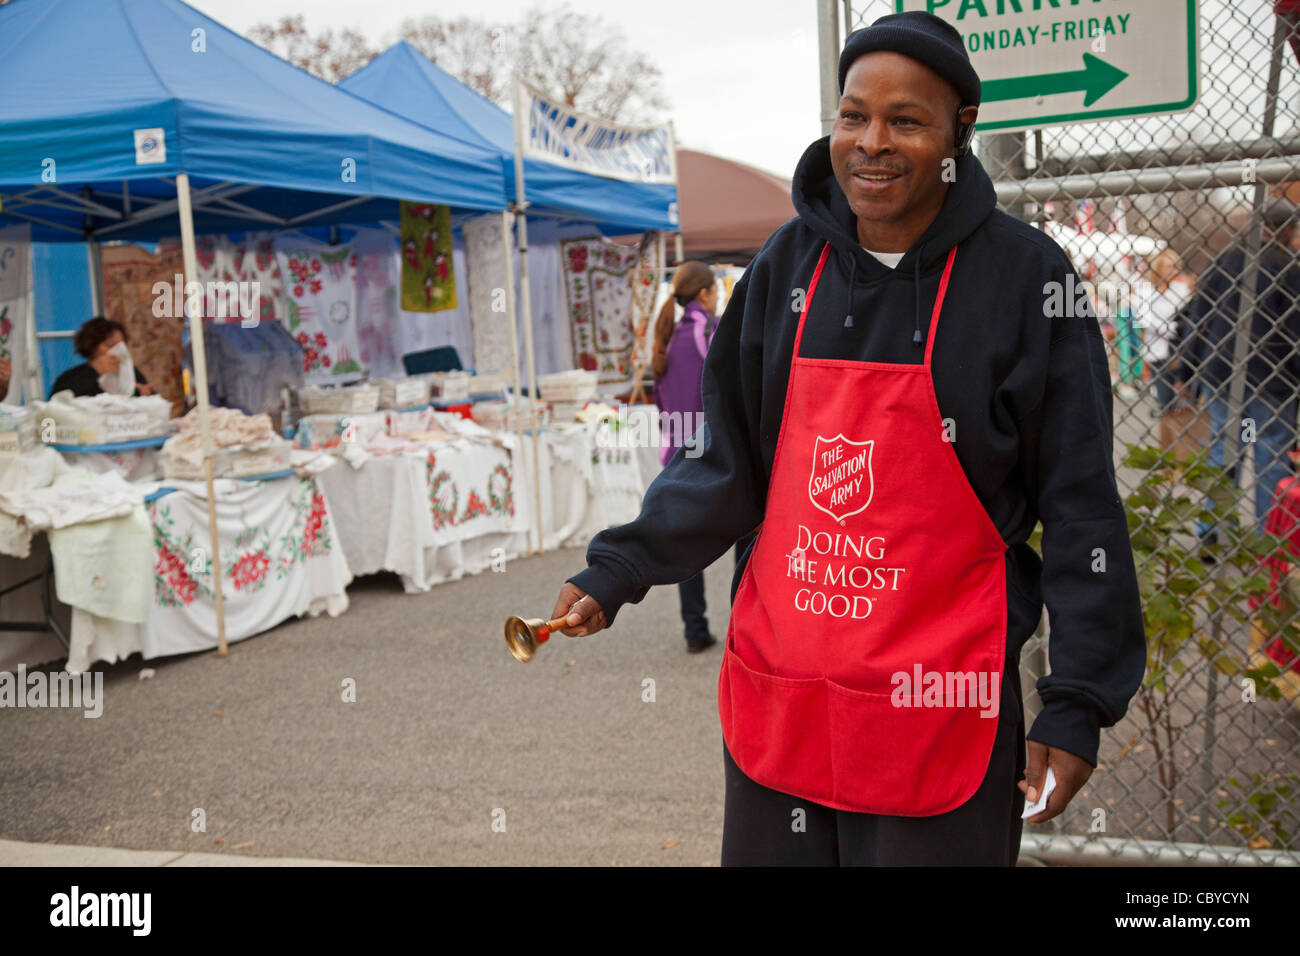 Washington, DC - A 'bell ringer' for the Salvation Army solicits donations for the religious charity outside a flea market. Stock Photo